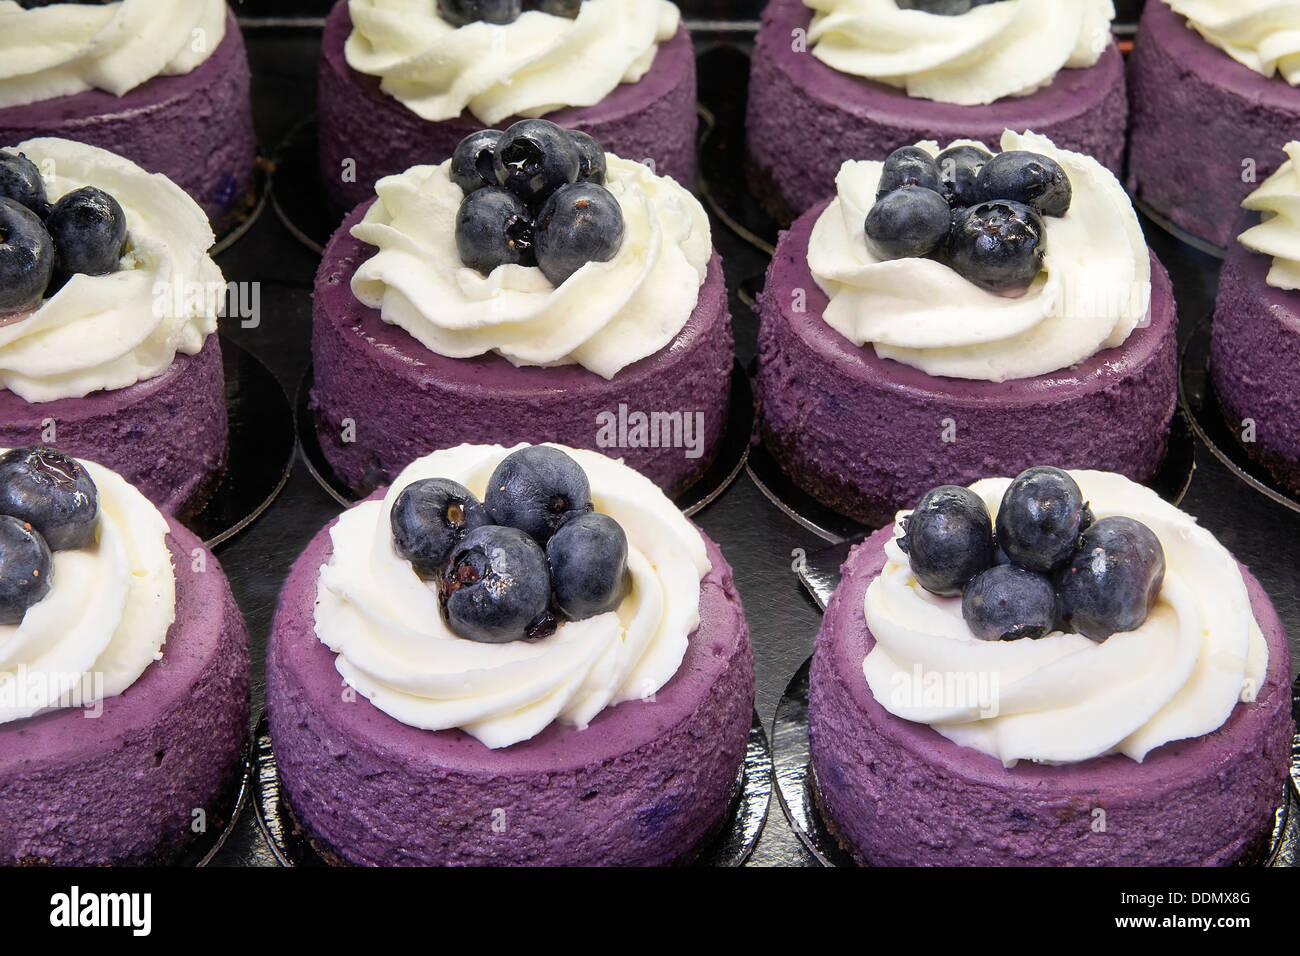 Blueberry Mousse Cake Topped with Blueberries and Whipped Cream at Bakery Shop Stock Photo